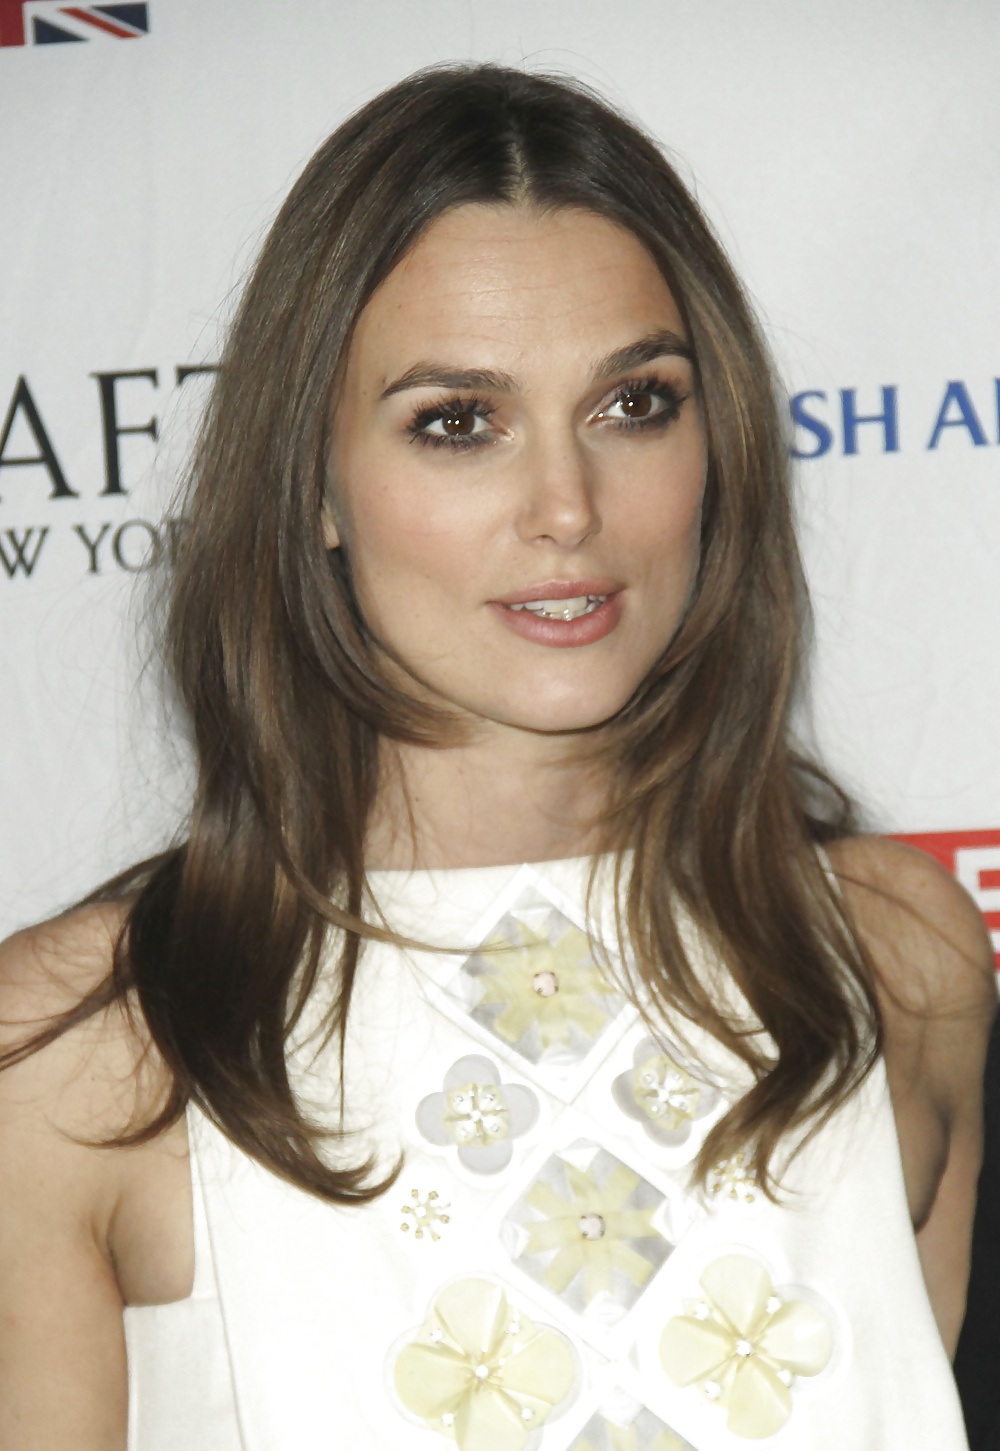 Keira Knightley The Royal Lady of England #35649308